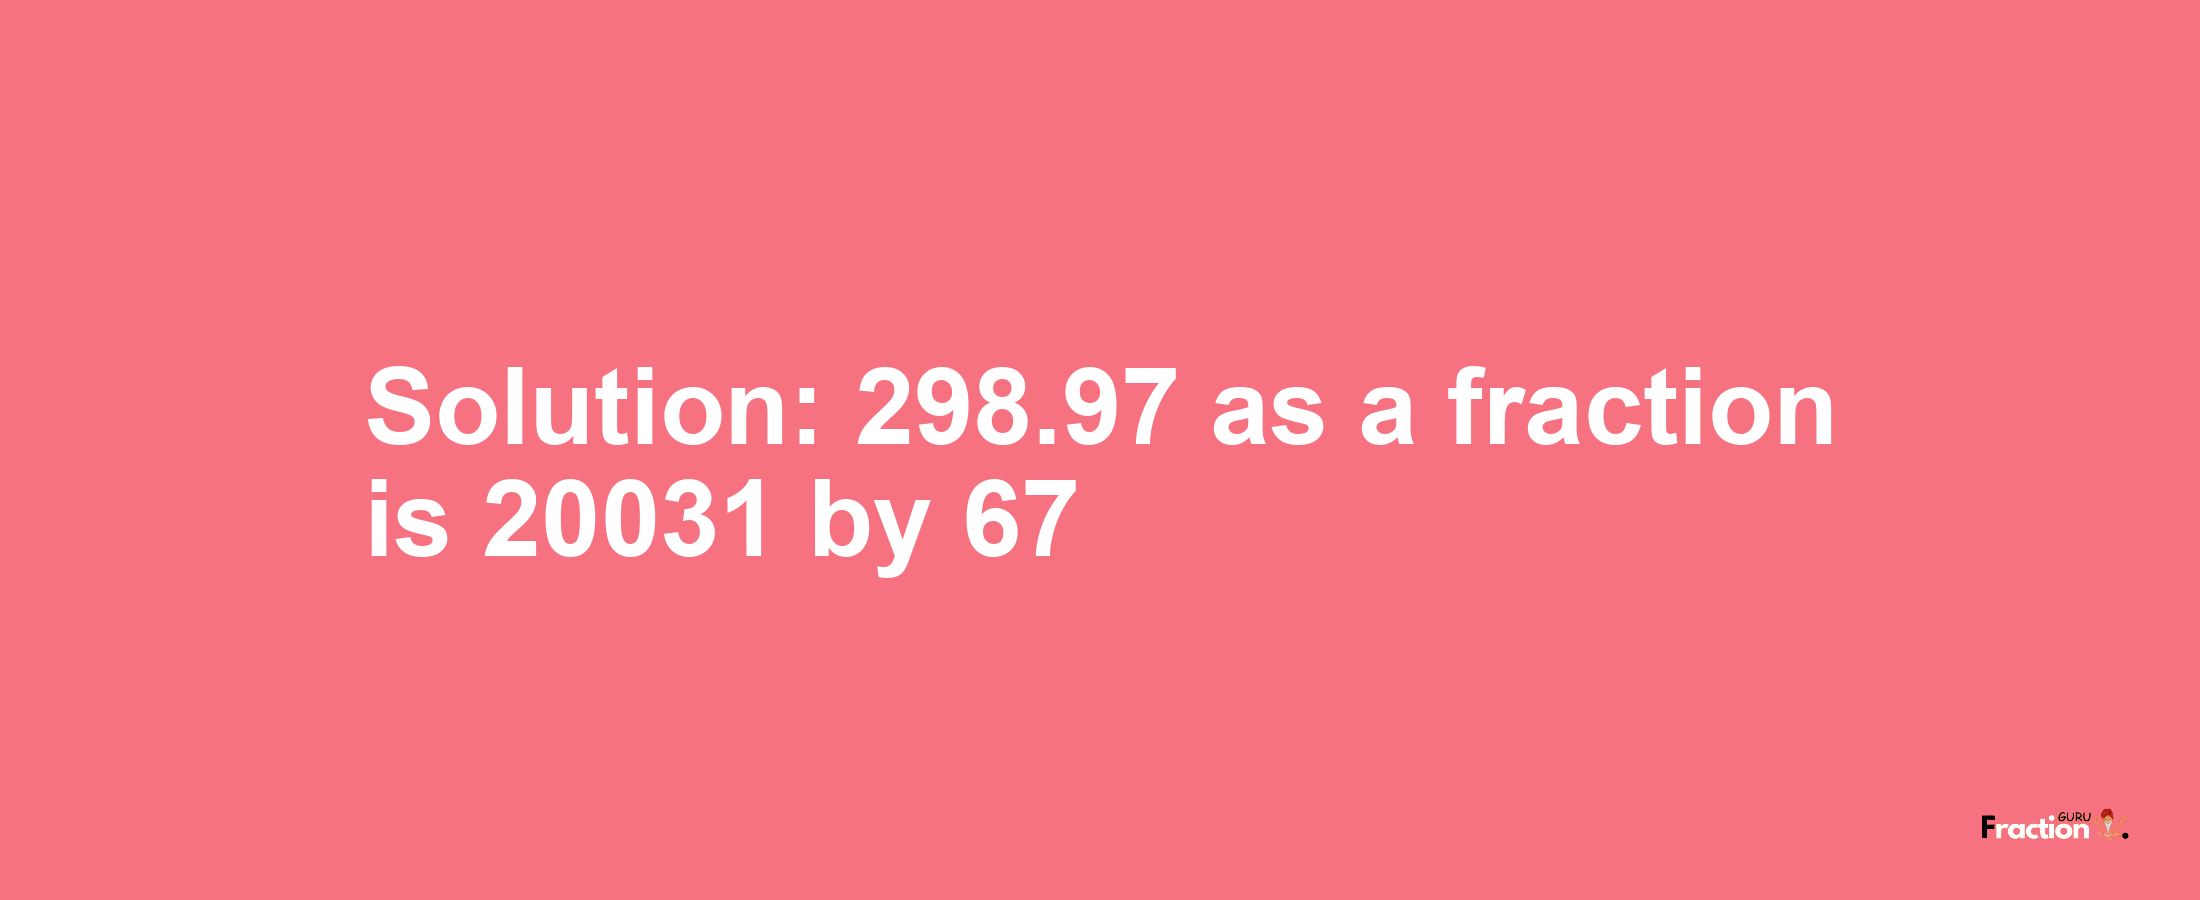 Solution:298.97 as a fraction is 20031/67